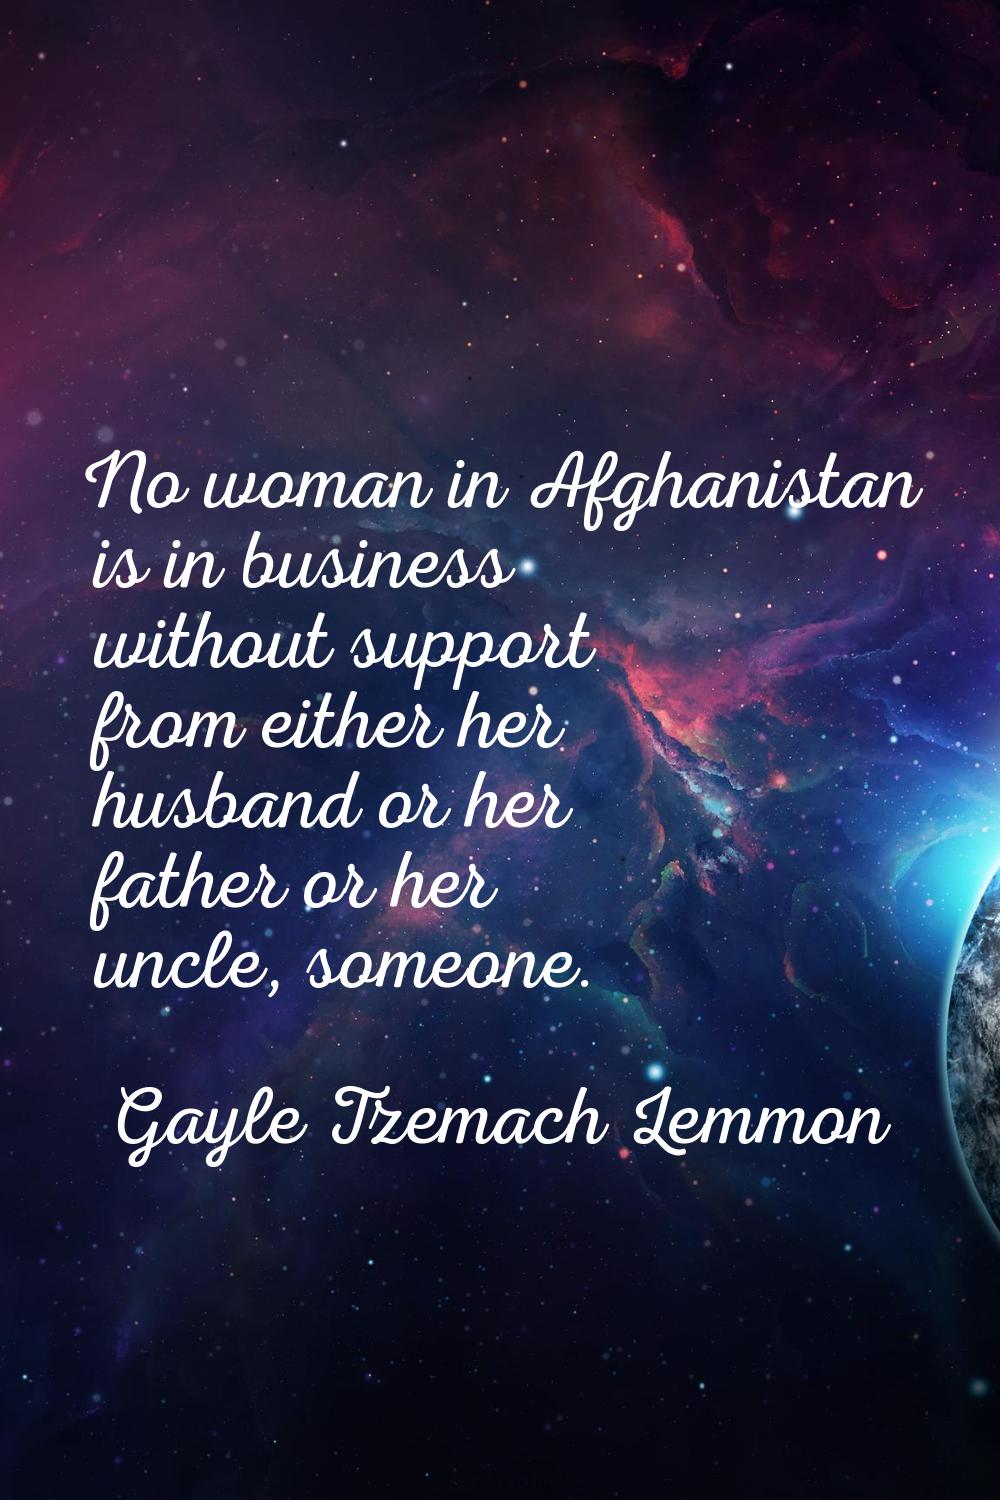 No woman in Afghanistan is in business without support from either her husband or her father or her